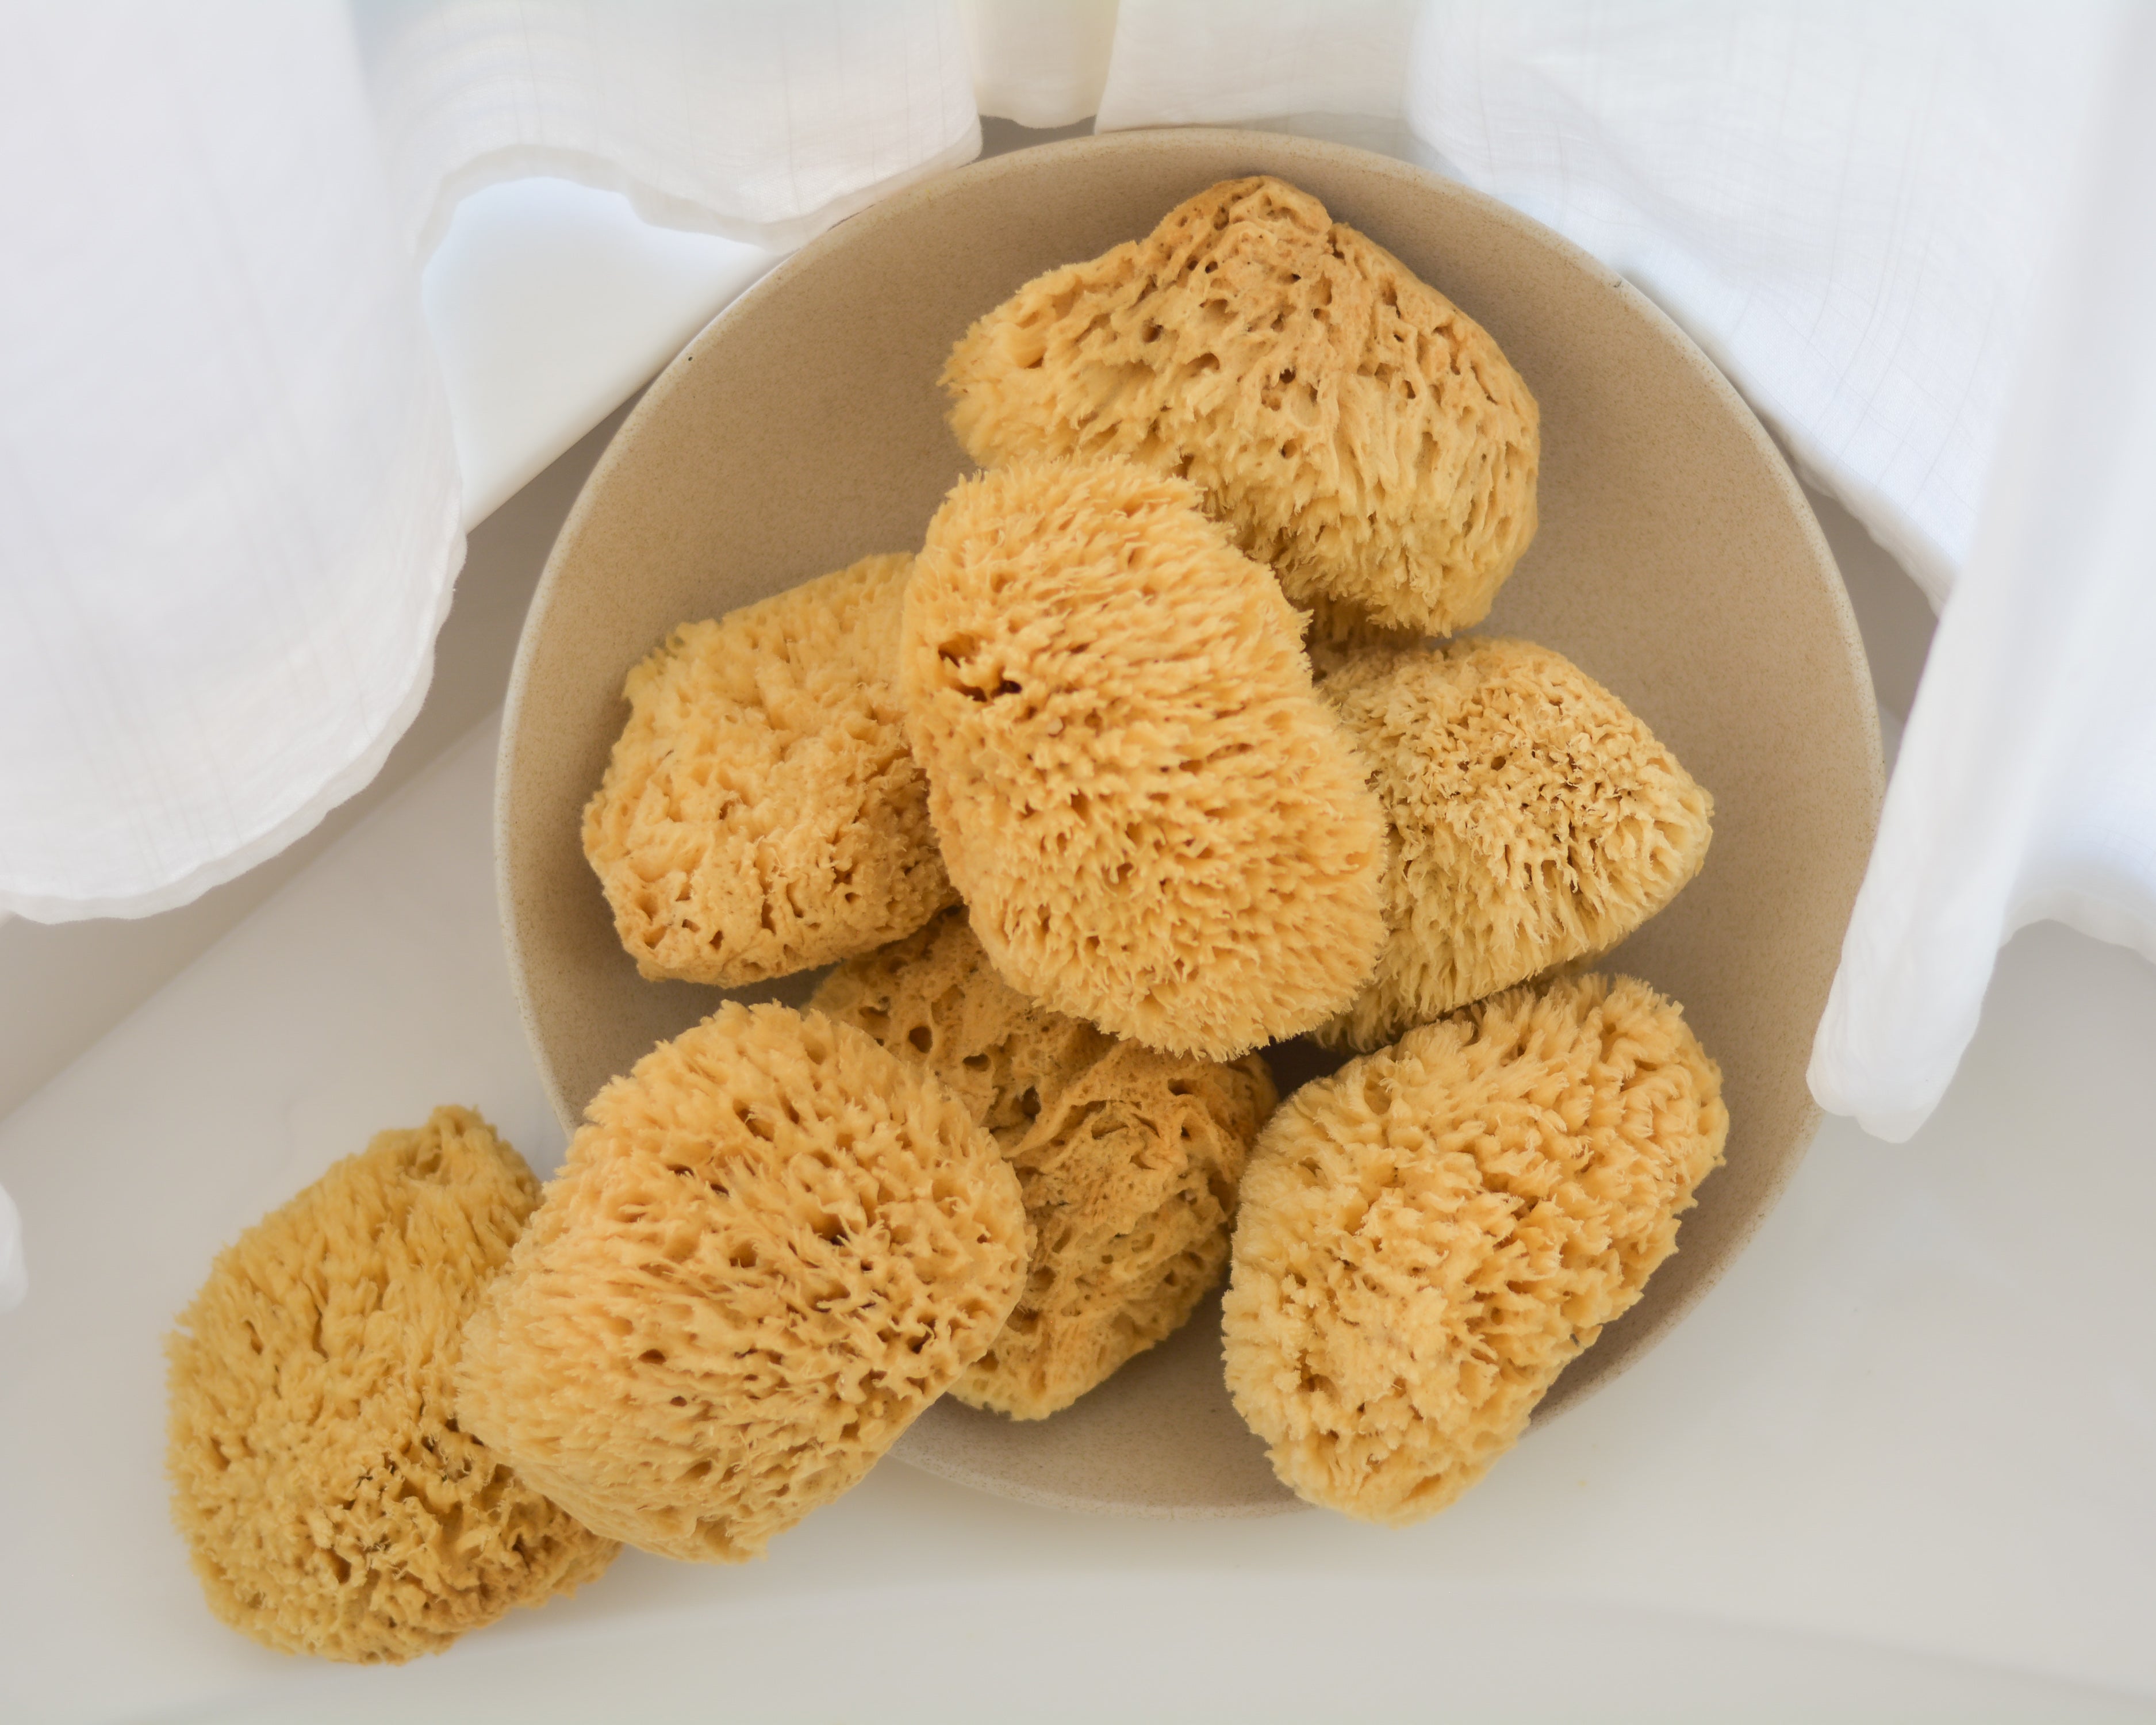 240+ Natural Sea Sponges For Sale Stock Photos, Pictures & Royalty